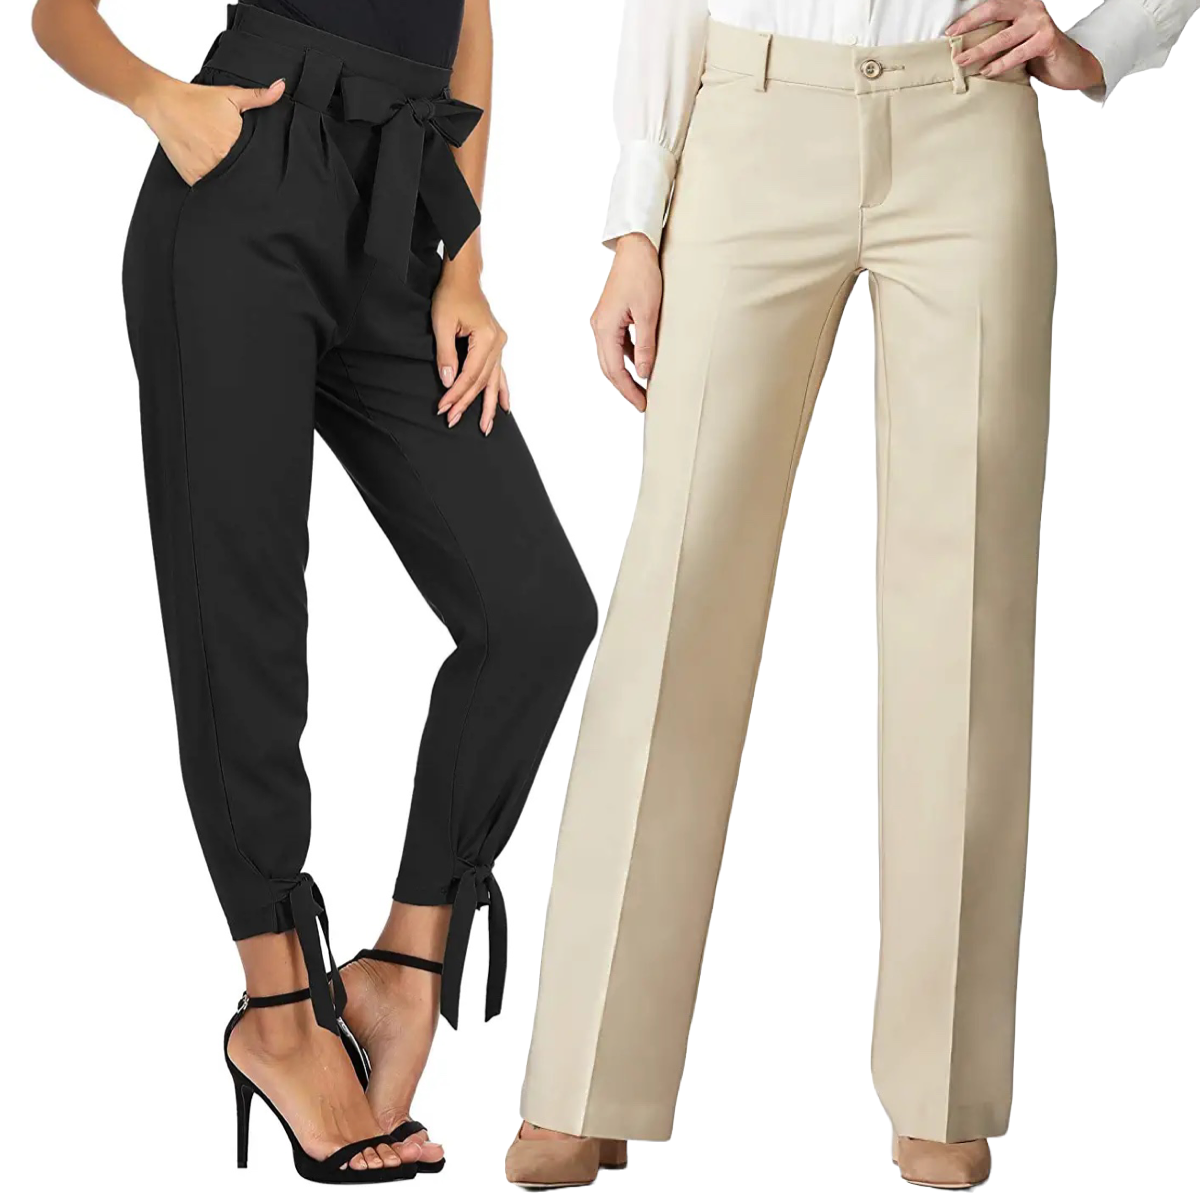 Famulily Flare Leggings Pants Female Office Business Work Pants